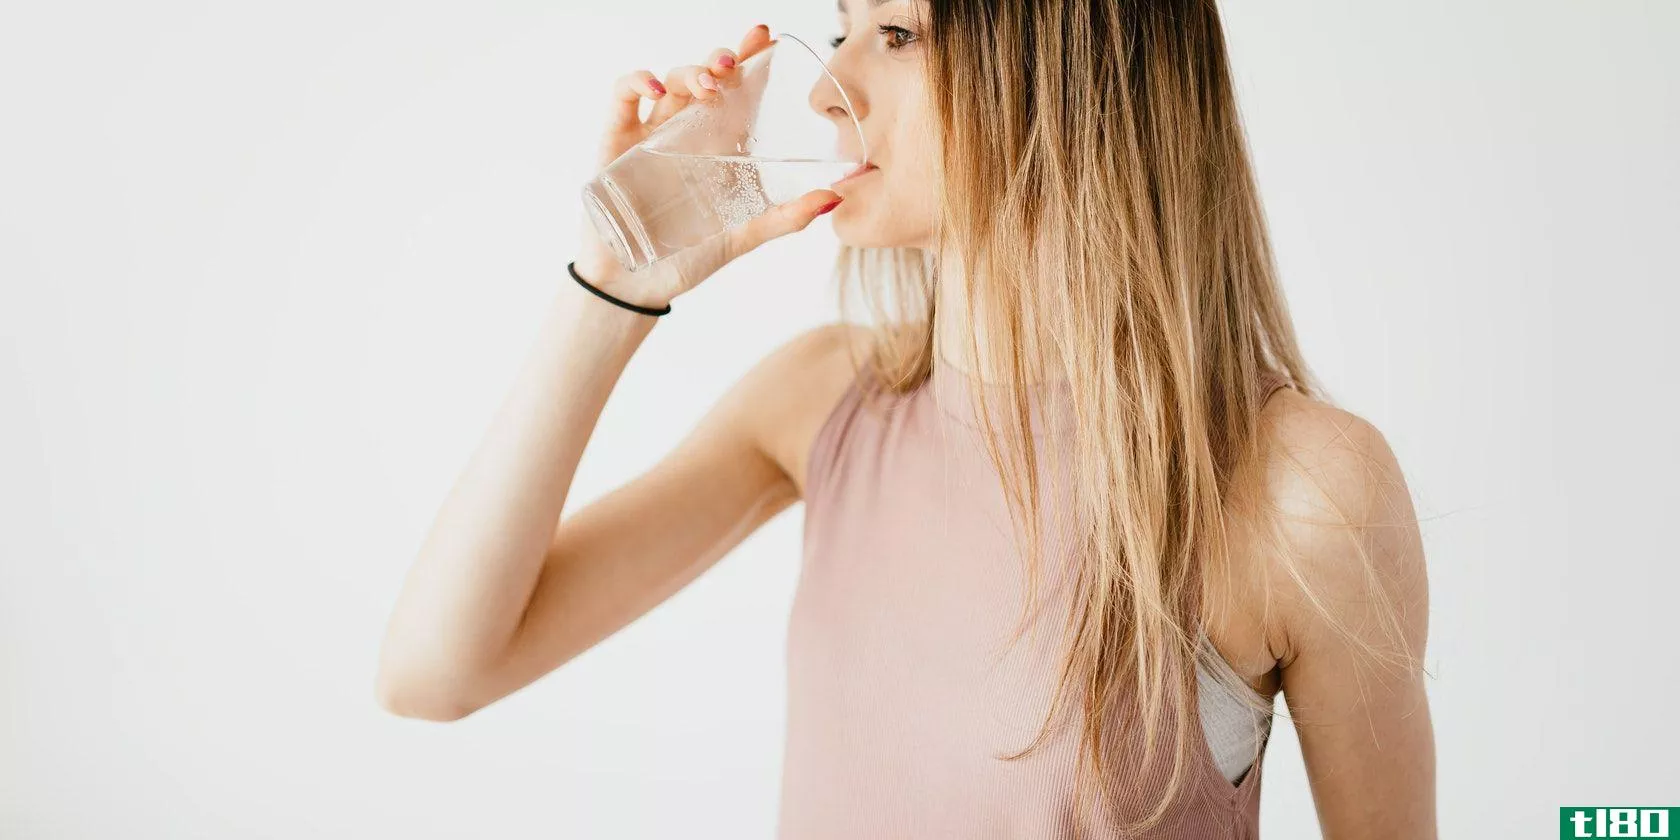 Woman in Pink Drinking Water w/ Right Hand